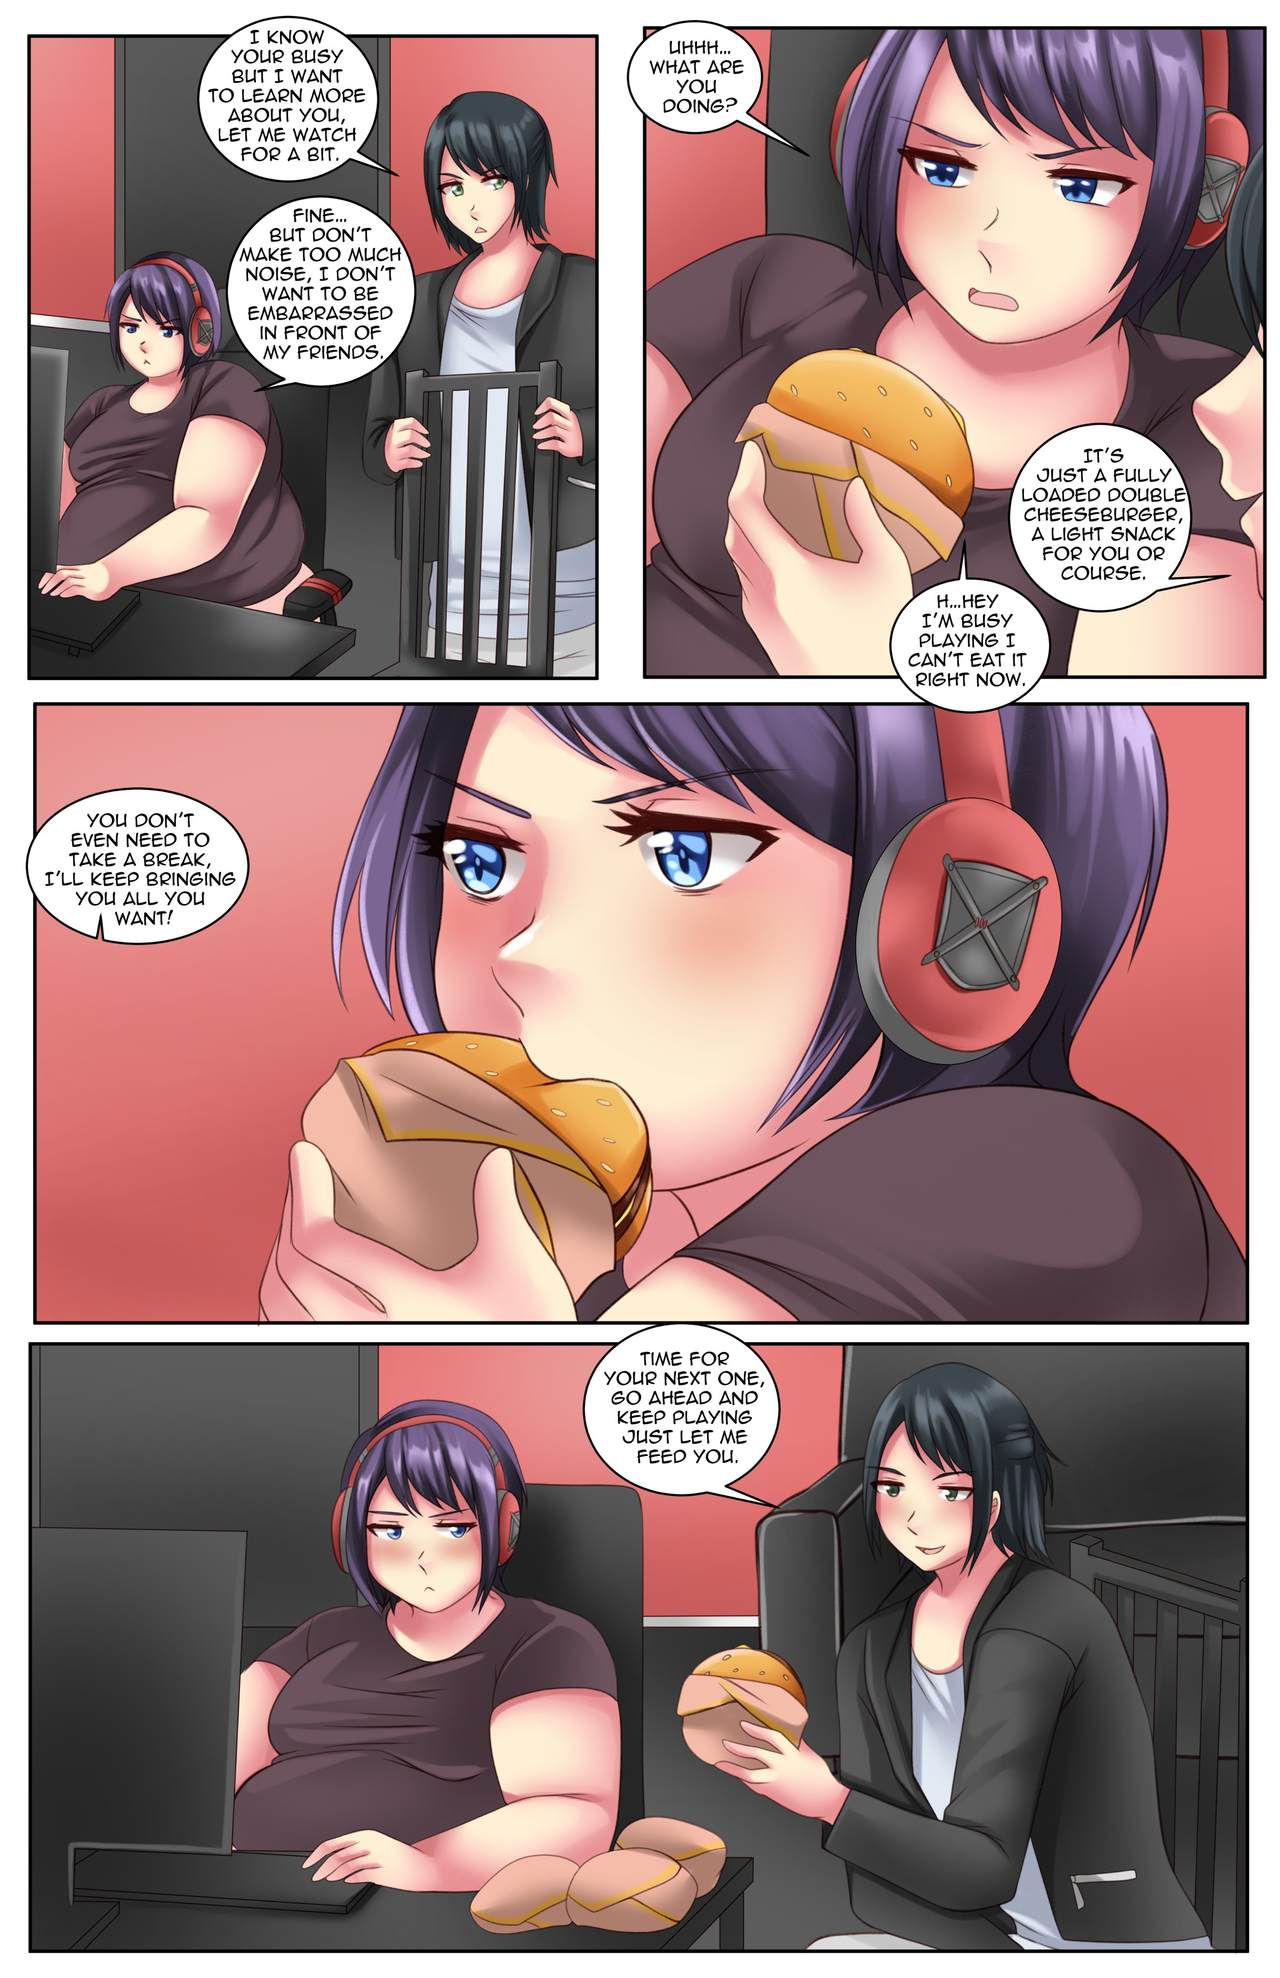 [sweetdreamcoffee] The Weight of Experience (Ongoing) 56